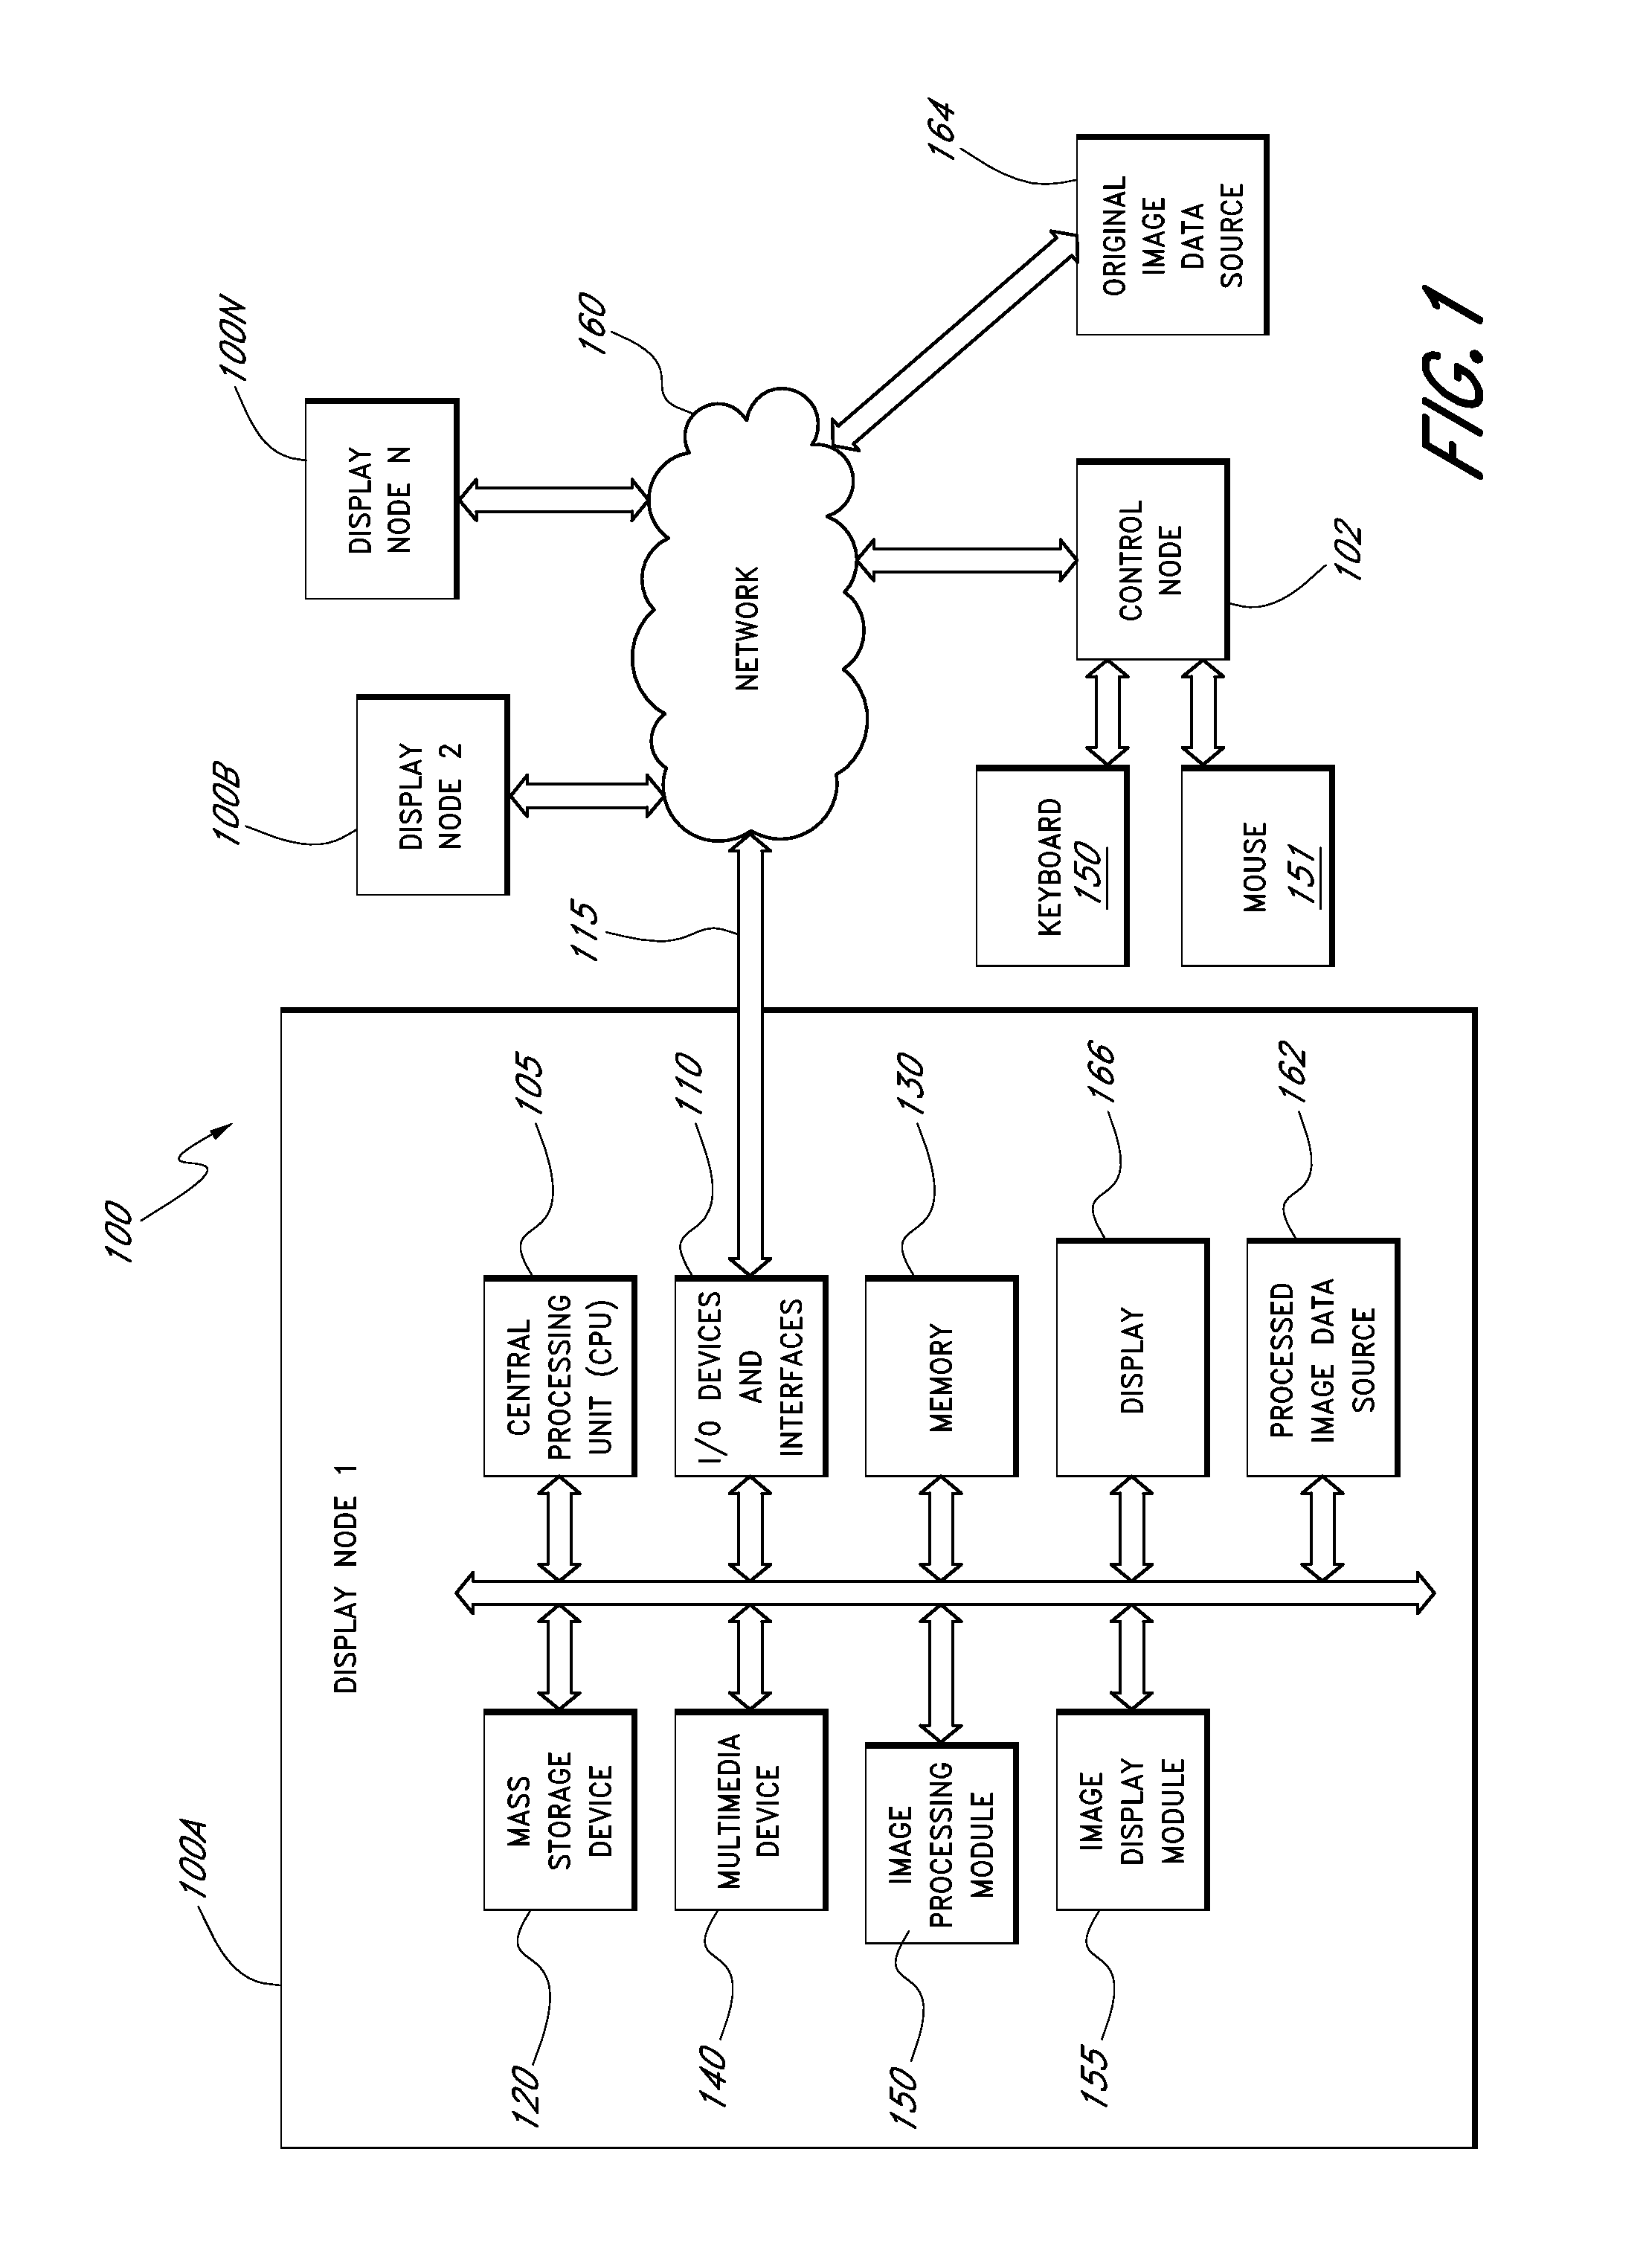 Systems, methods, and devices for manipulation of images on tiled displays